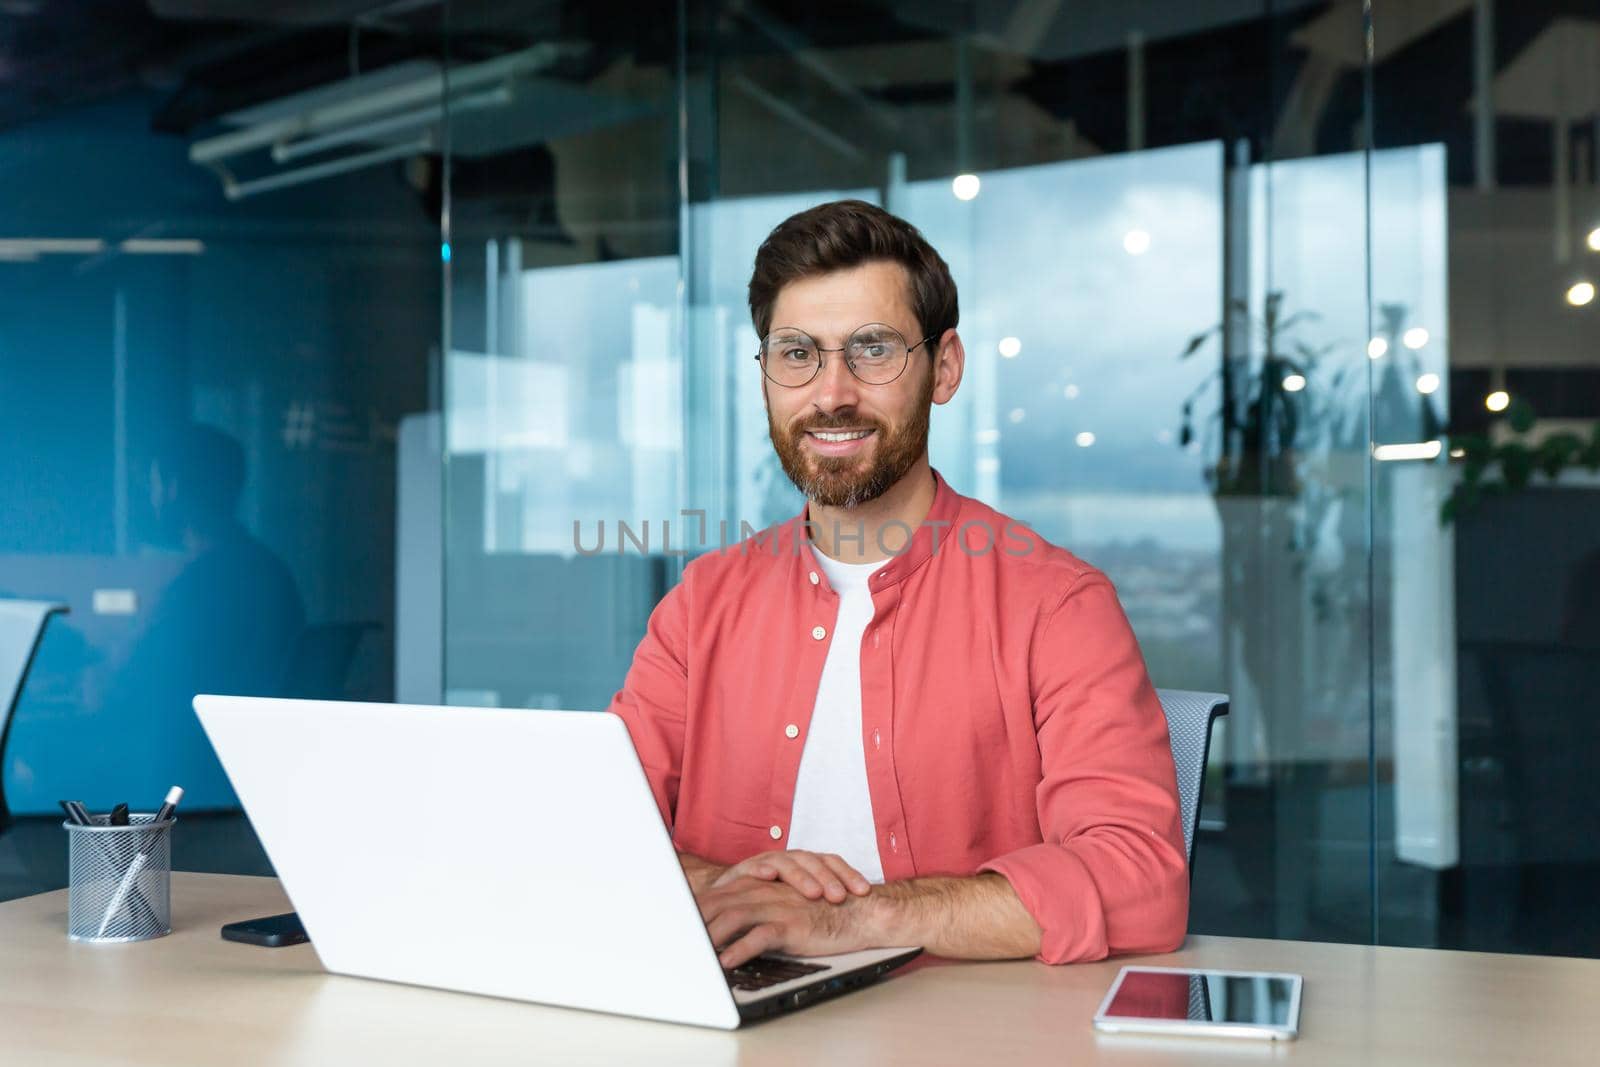 Portrait of mature businessman freelancer startup, bearded man smiling and looking at camera, business owner working inside modern office building wearing red shirt and glasses by voronaman